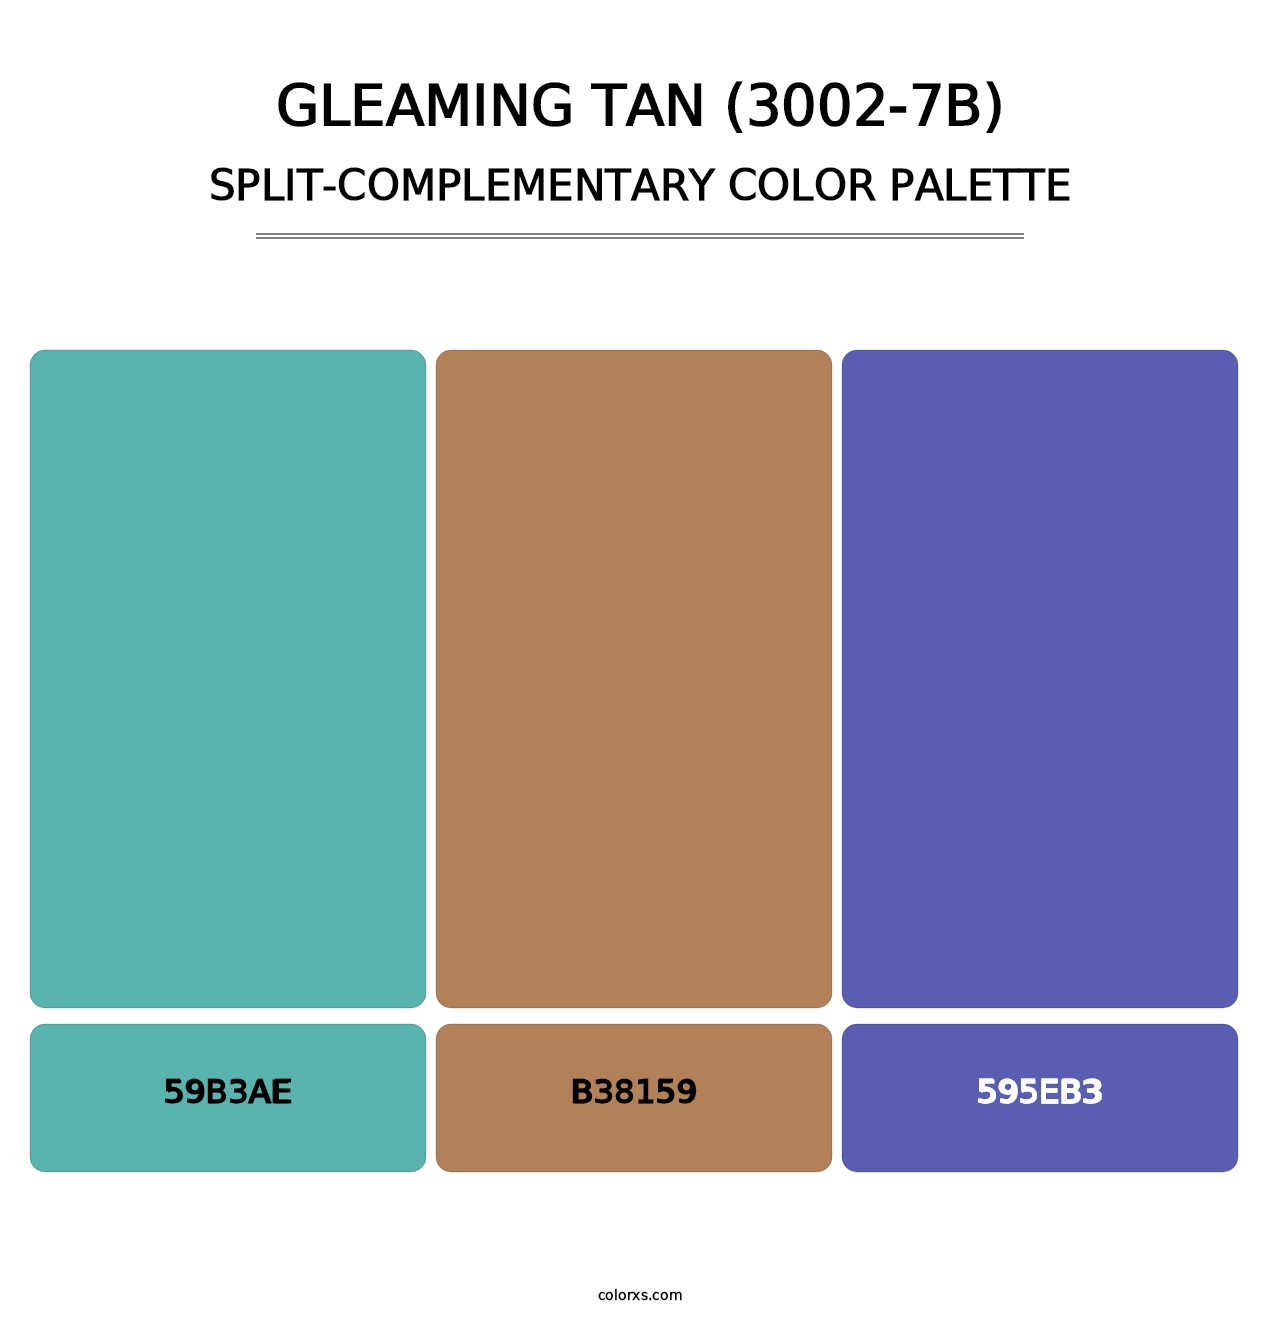 Gleaming Tan (3002-7B) - Split-Complementary Color Palette